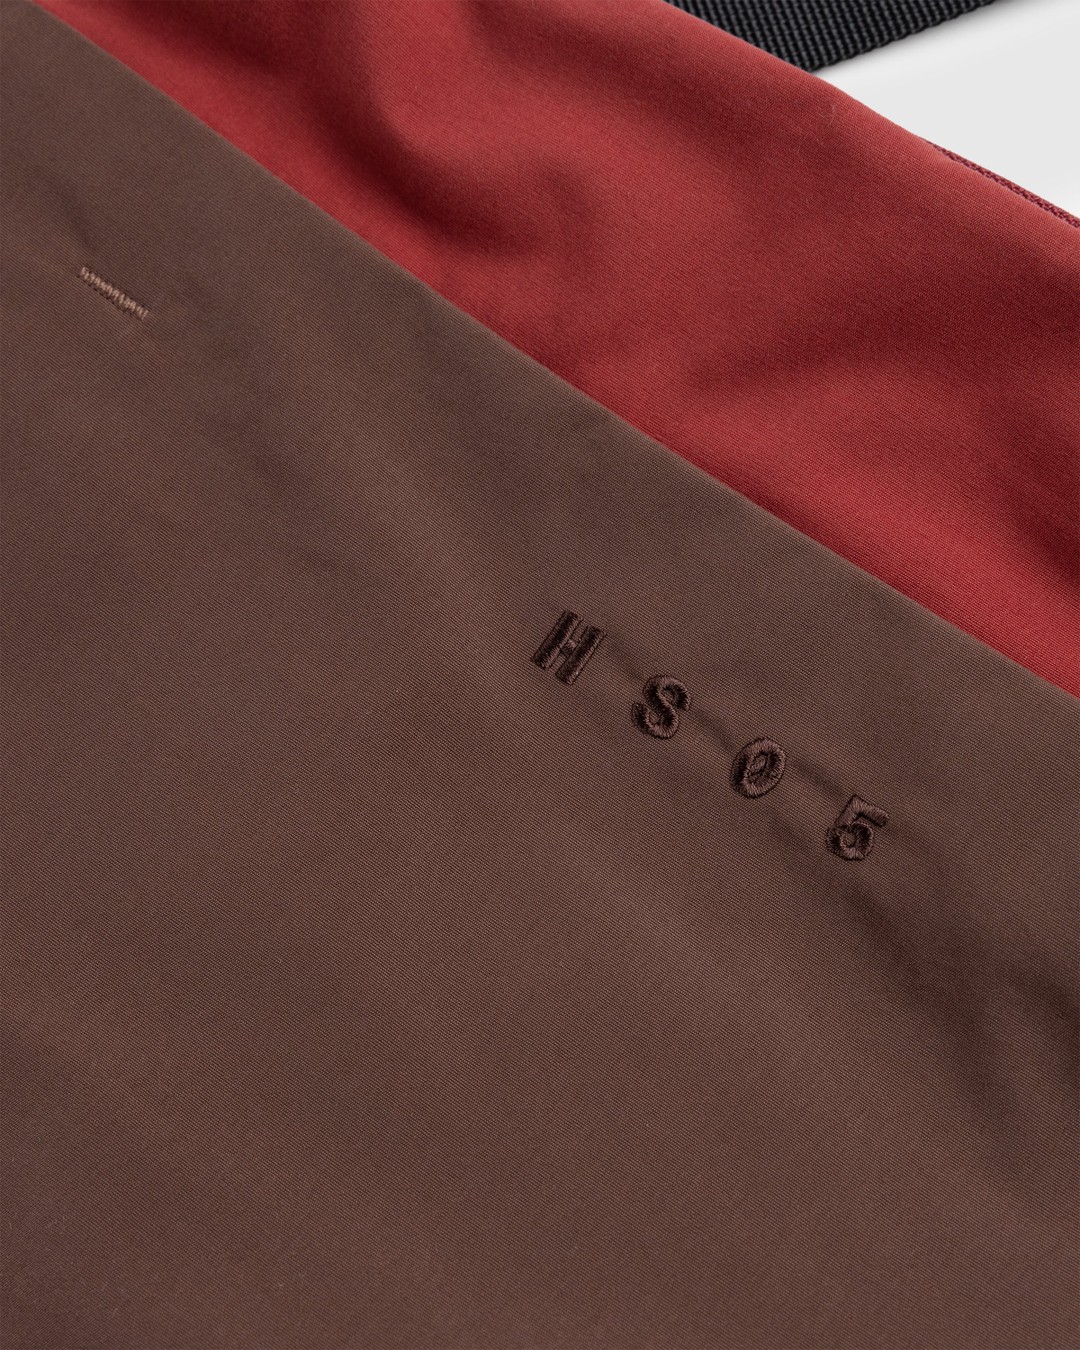 Highsnobiety HS05 – 3 Layer Nylon Side Bag Red - Bags - Red - Image 5